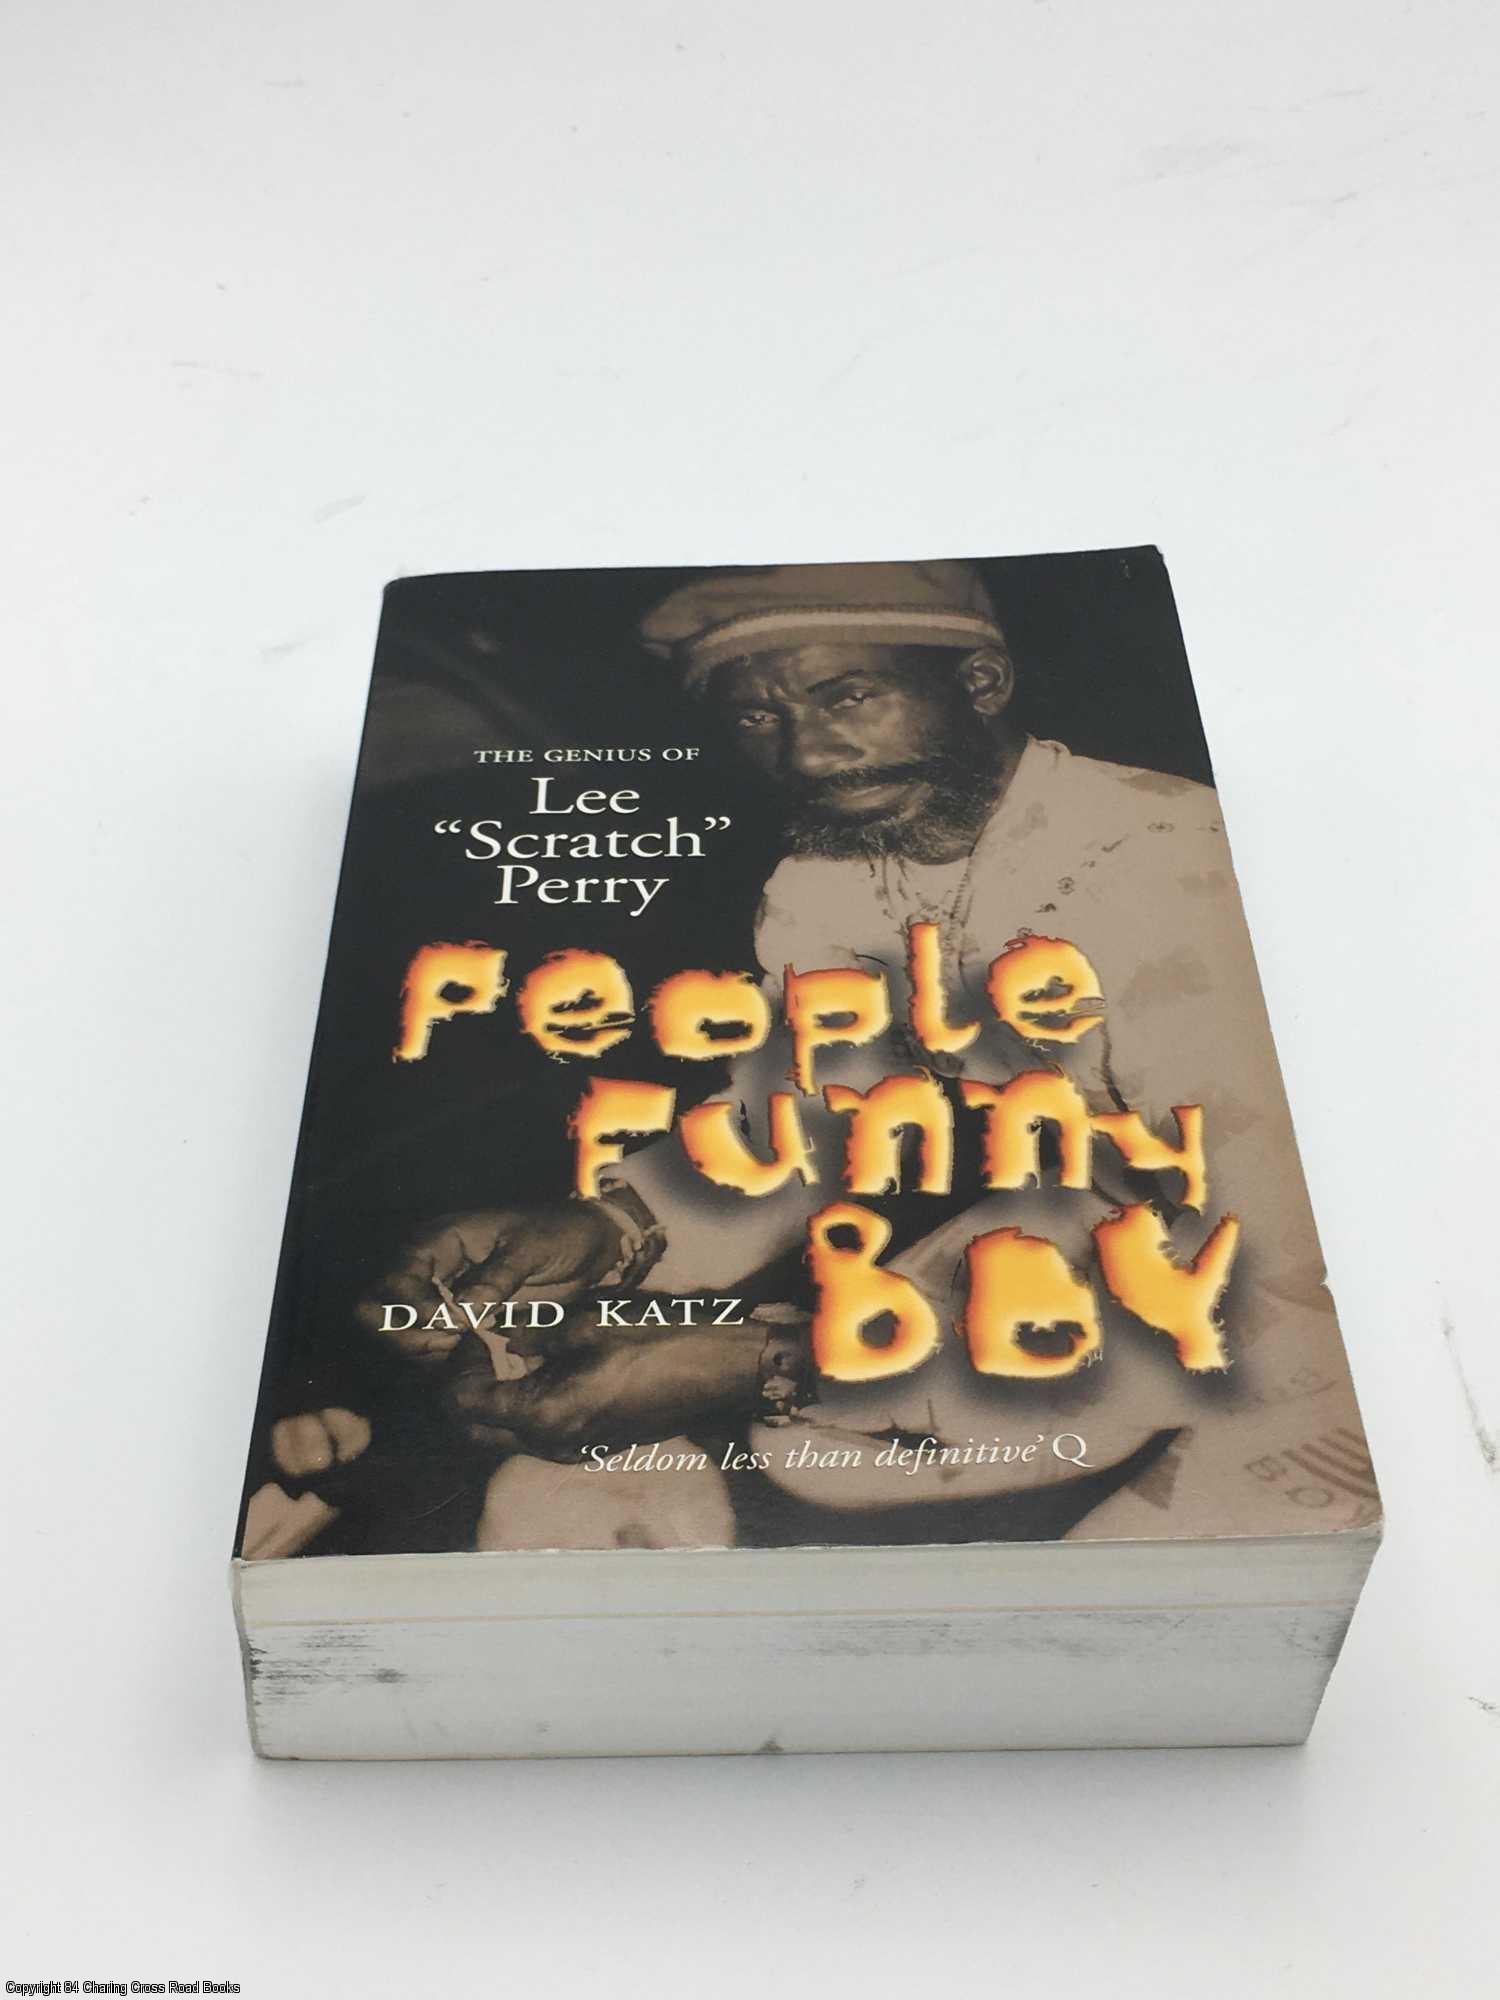 People Funny Boy: The Genius of Lee Scratch Perry by David Katz on 84  Charing Cross Rare Books